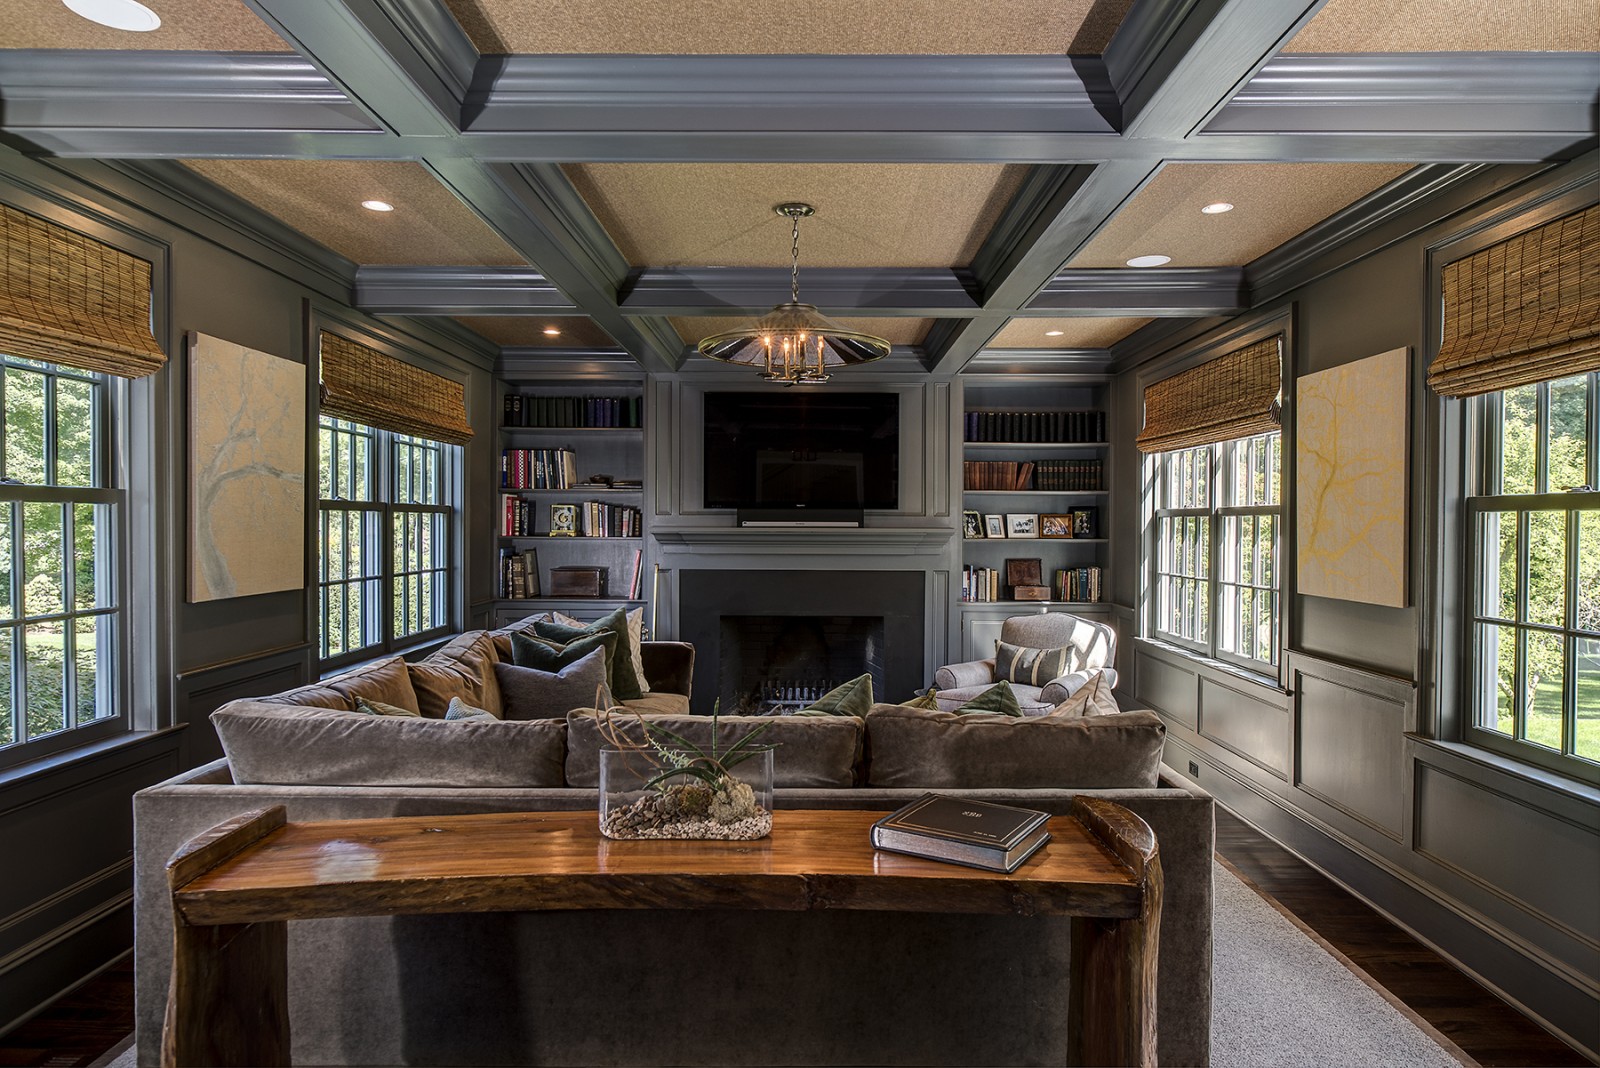 The Coffered Ceiling for Architectural Enhancement